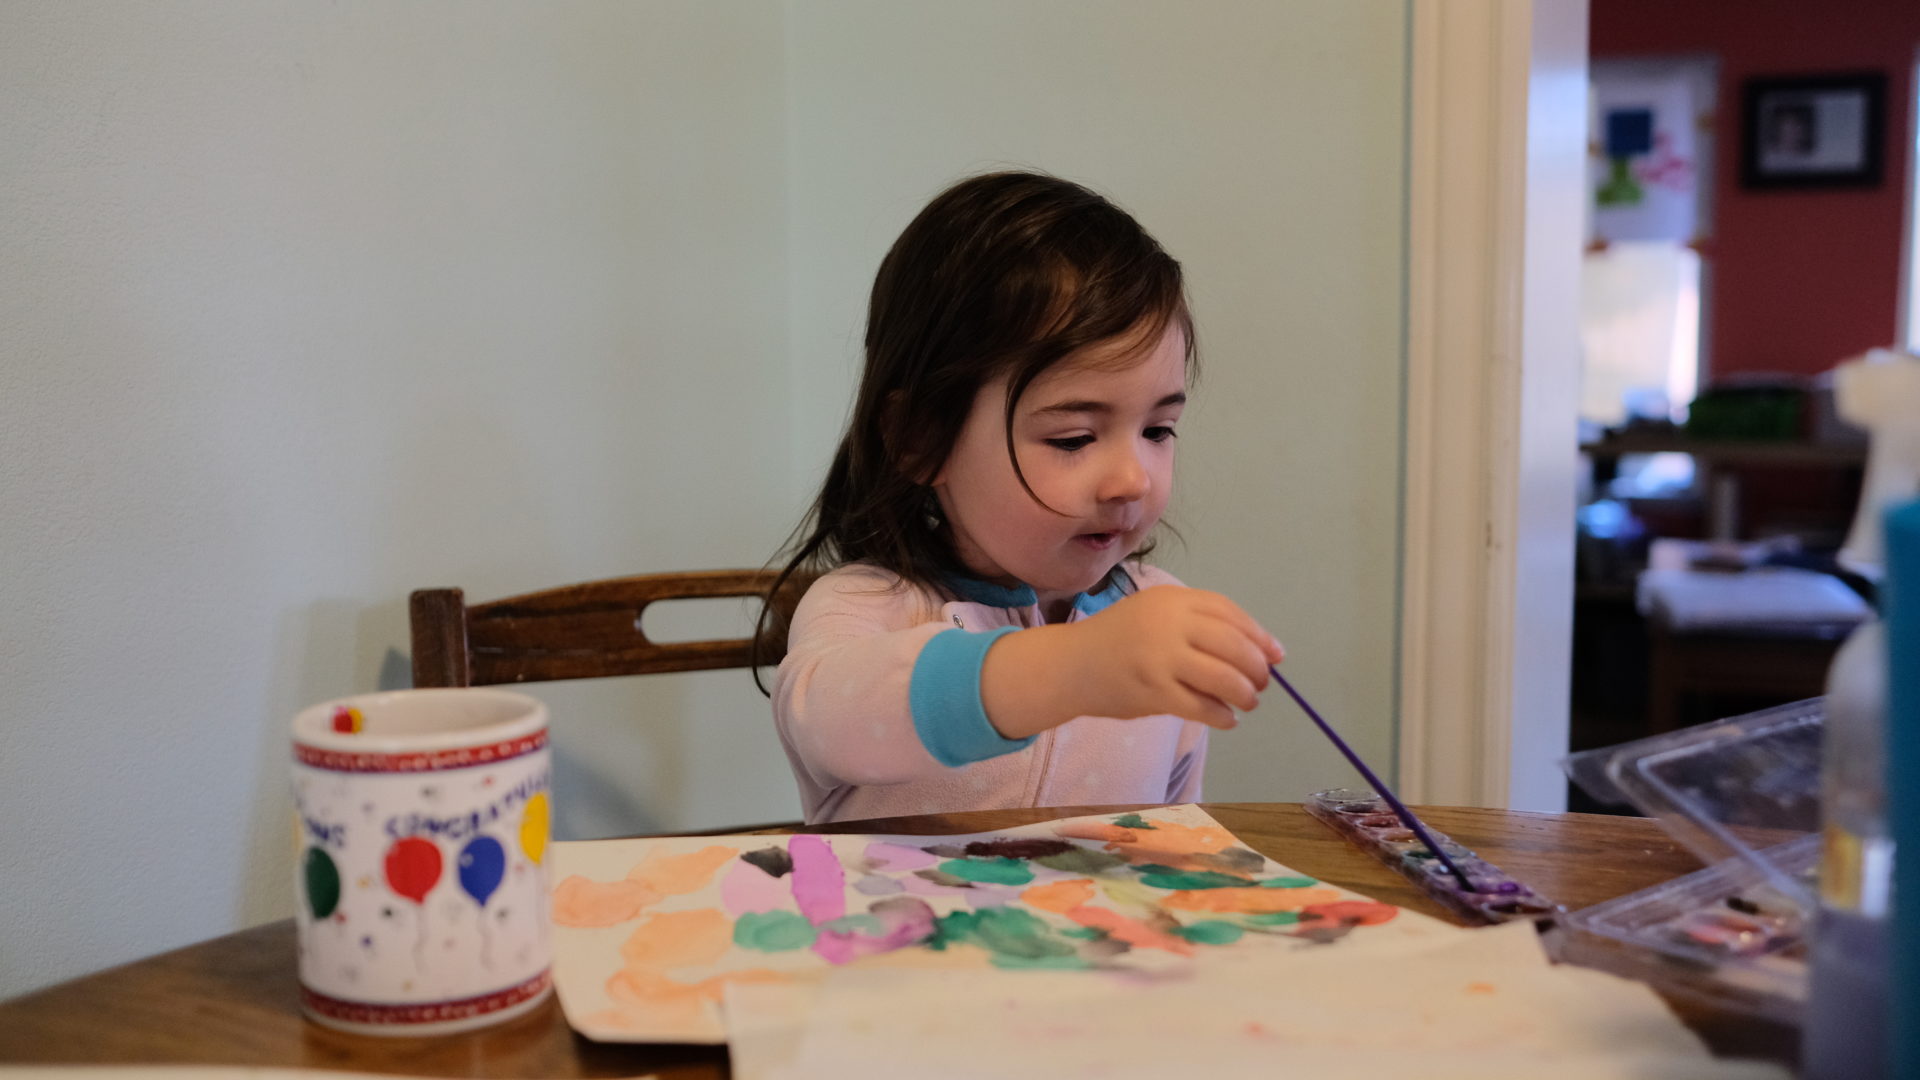 Elle paints with her watercolors at the kitchen table.